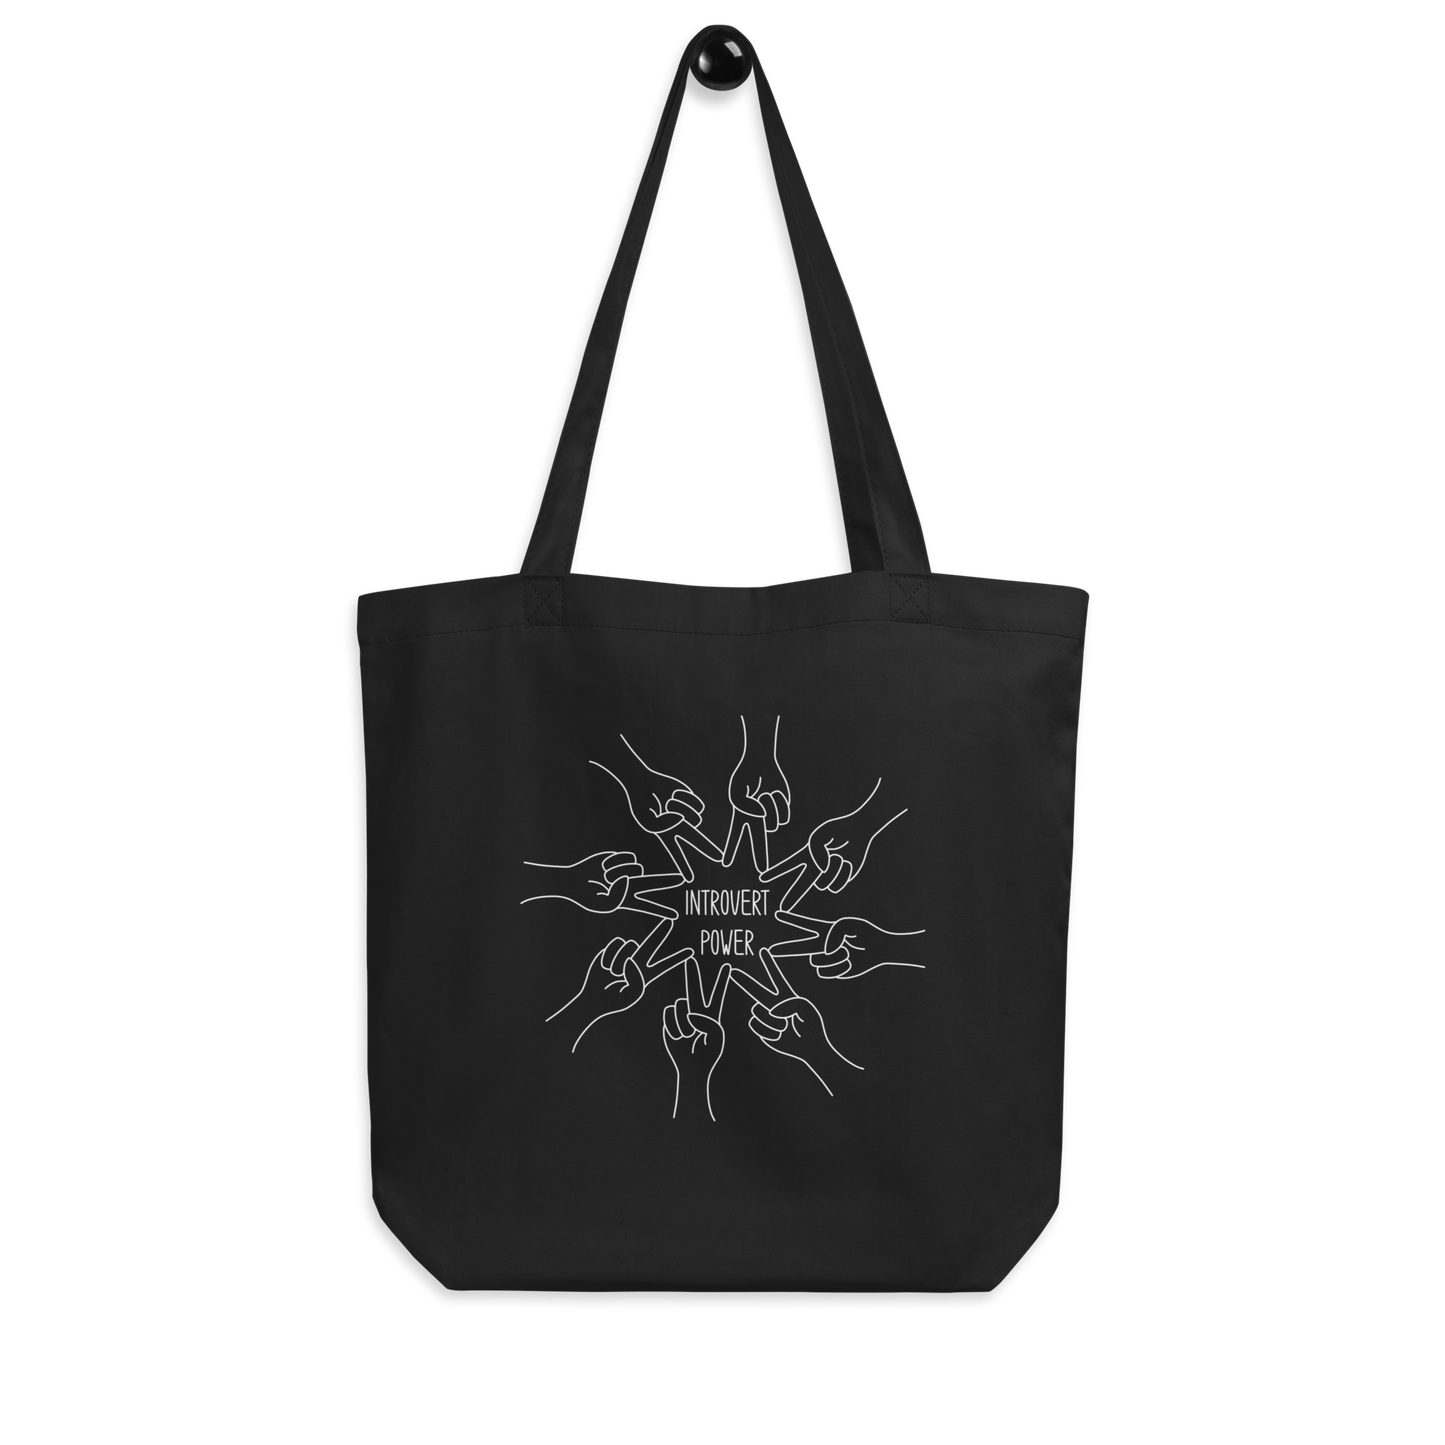 Introvert Power Tote